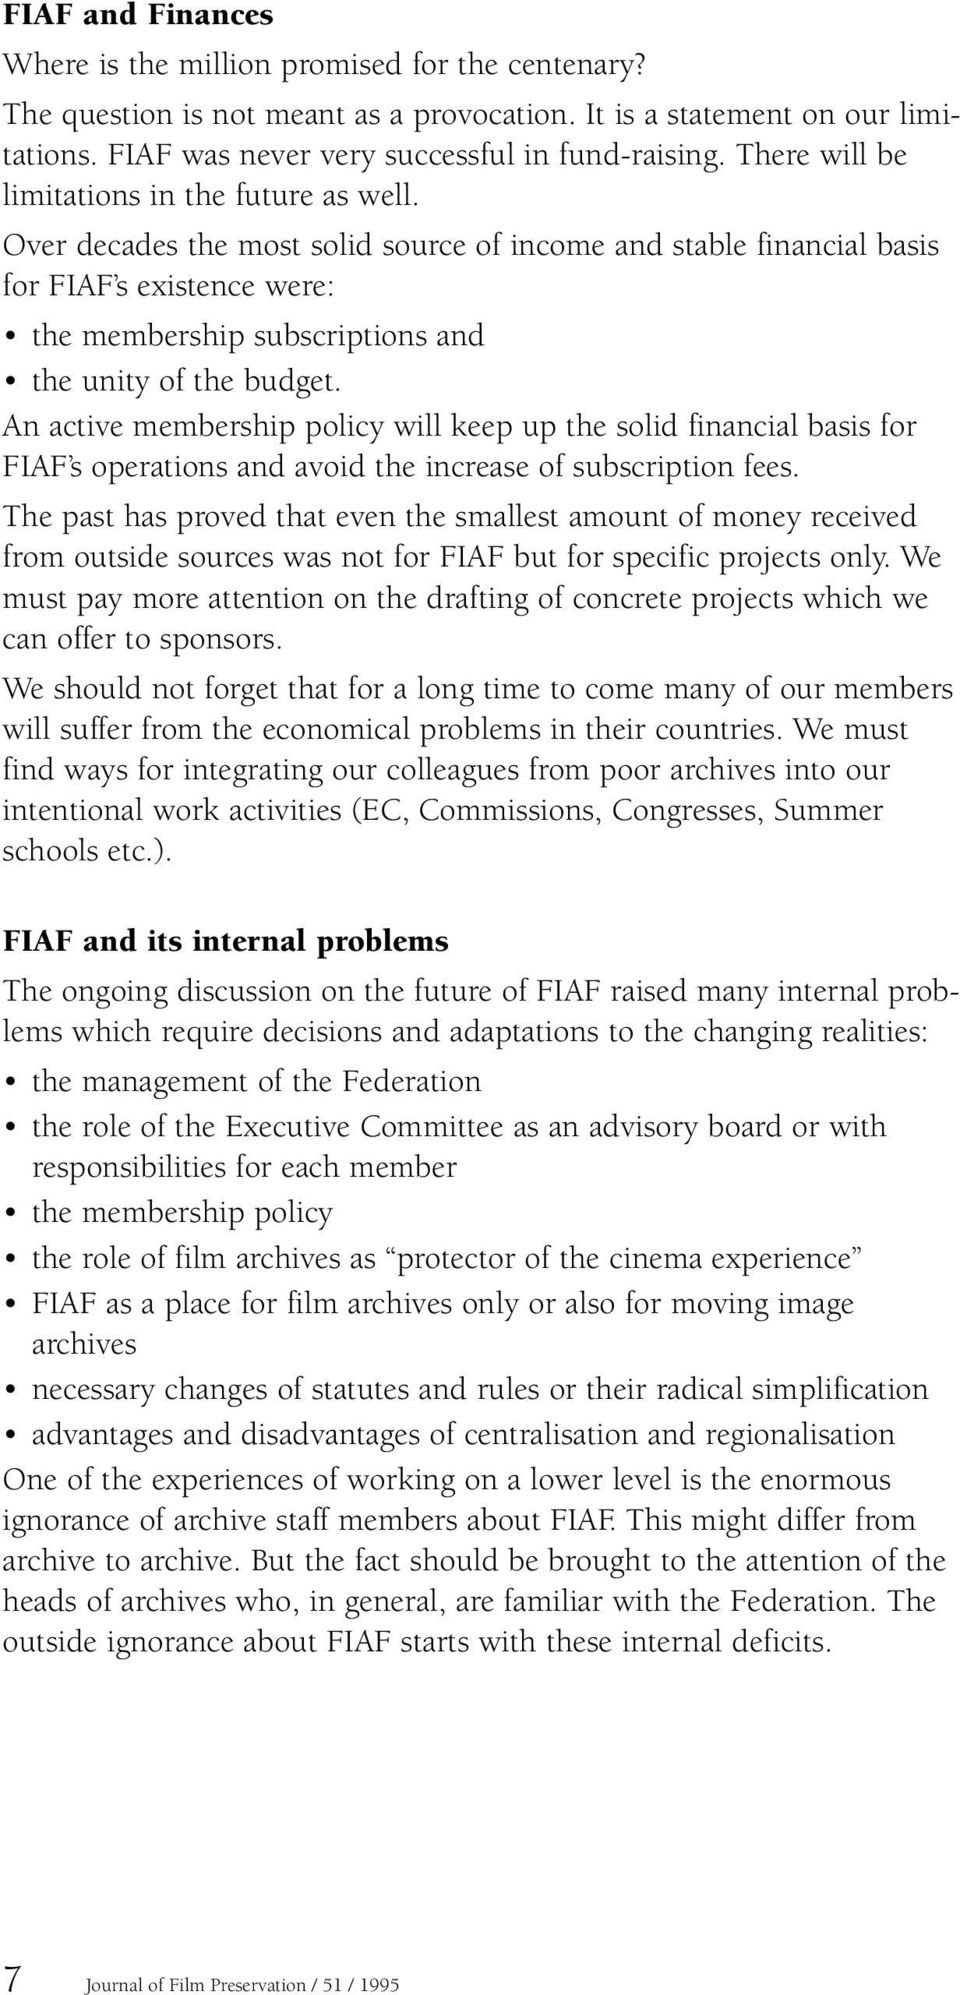 Over decades the most solid source of income and stable financial basis for FIAF s existence were: the membership subscriptions and the unity of the budget.